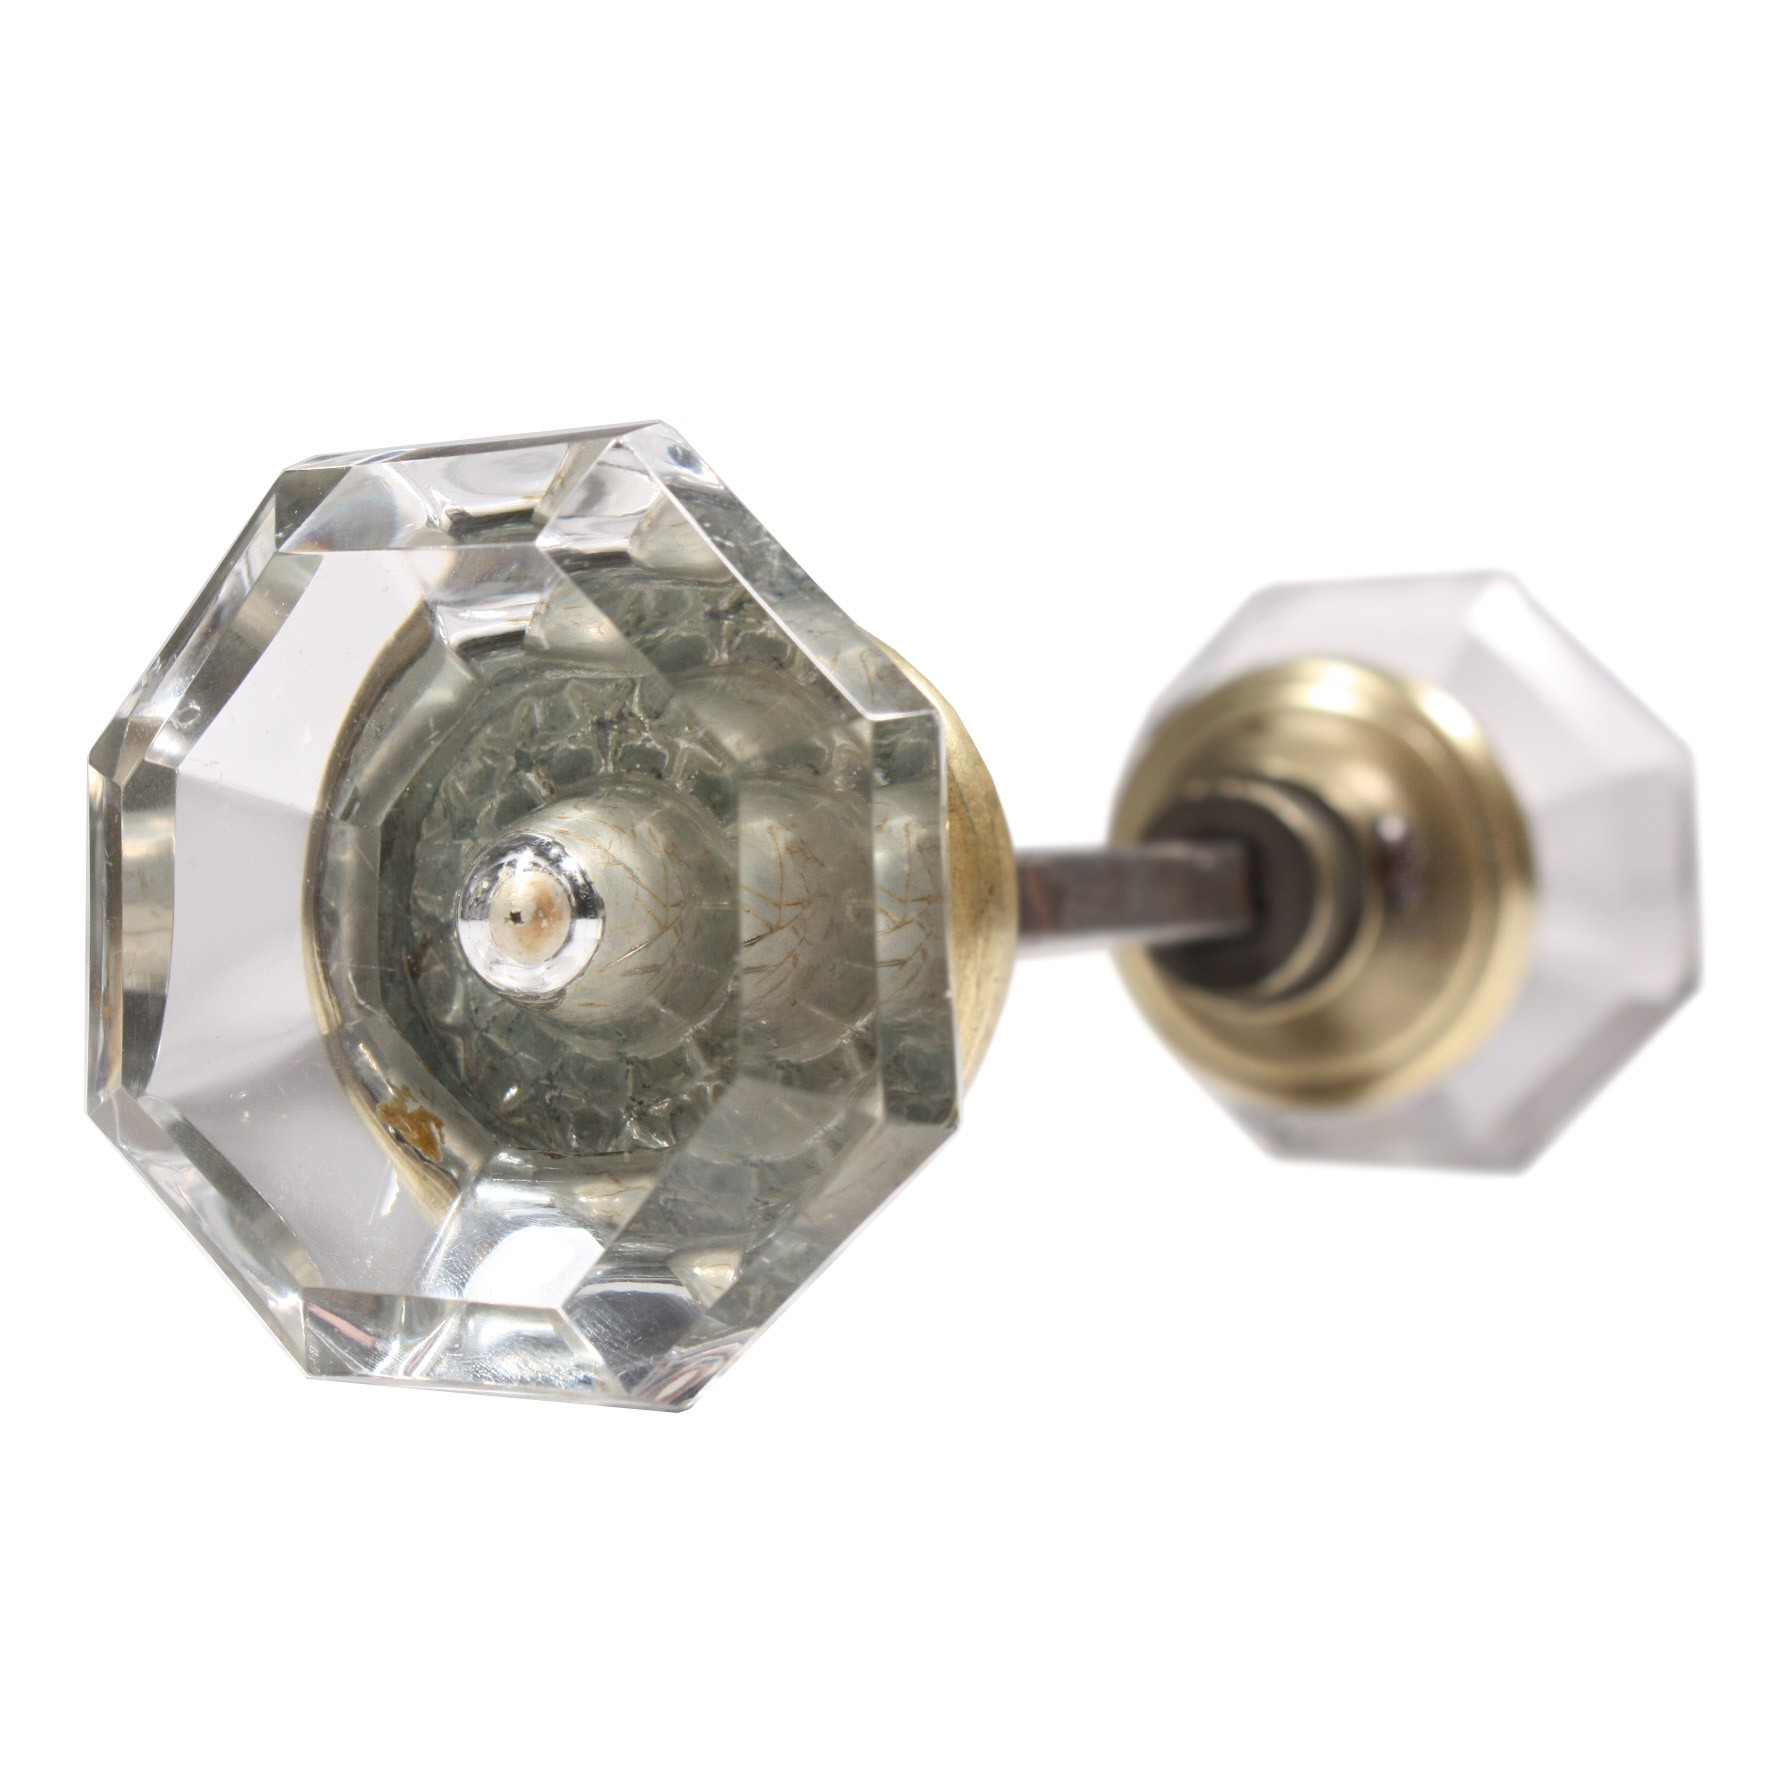 Unusual Antique Faceted Octagonal Glass Door Knob Set Preservation within sizing 1782 X 1782